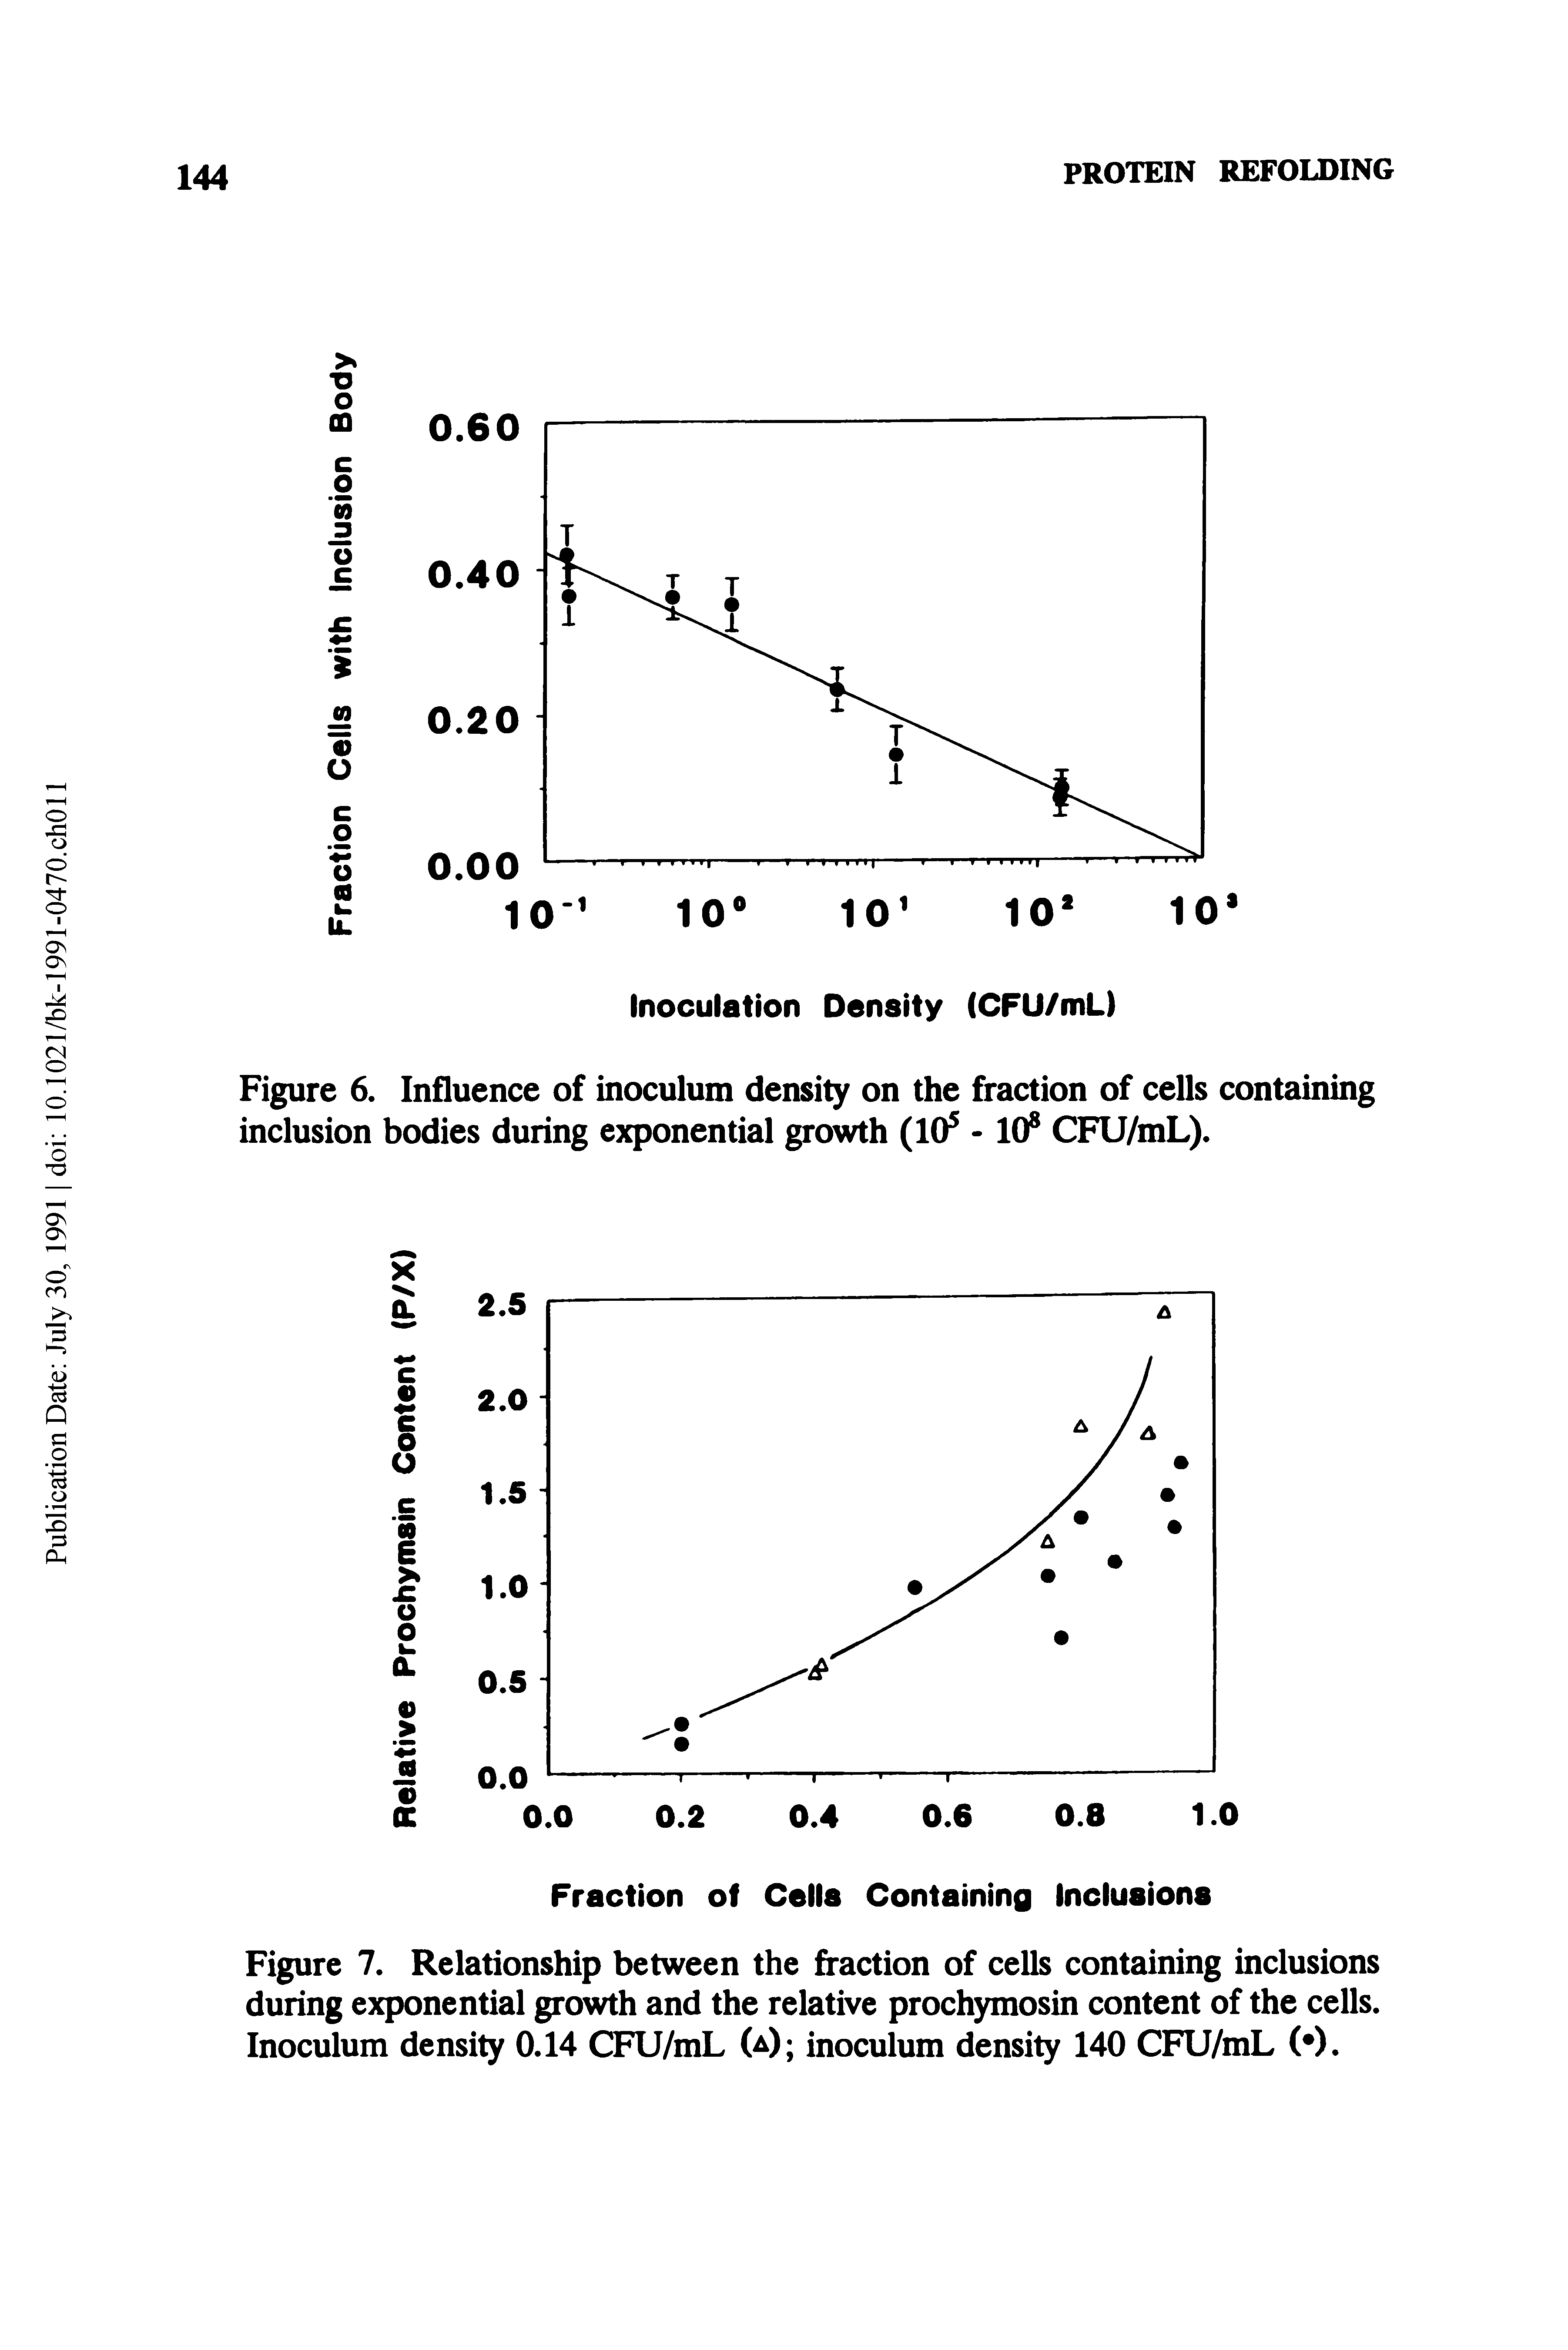 Figure 7. Relationship between the fraction of cells containing inclusions during exponential growth and the relative prochymosin content of the cells. Inoculum density 0.14 CFU/mL (a) inoculum density 140 CFU/mL ( ).